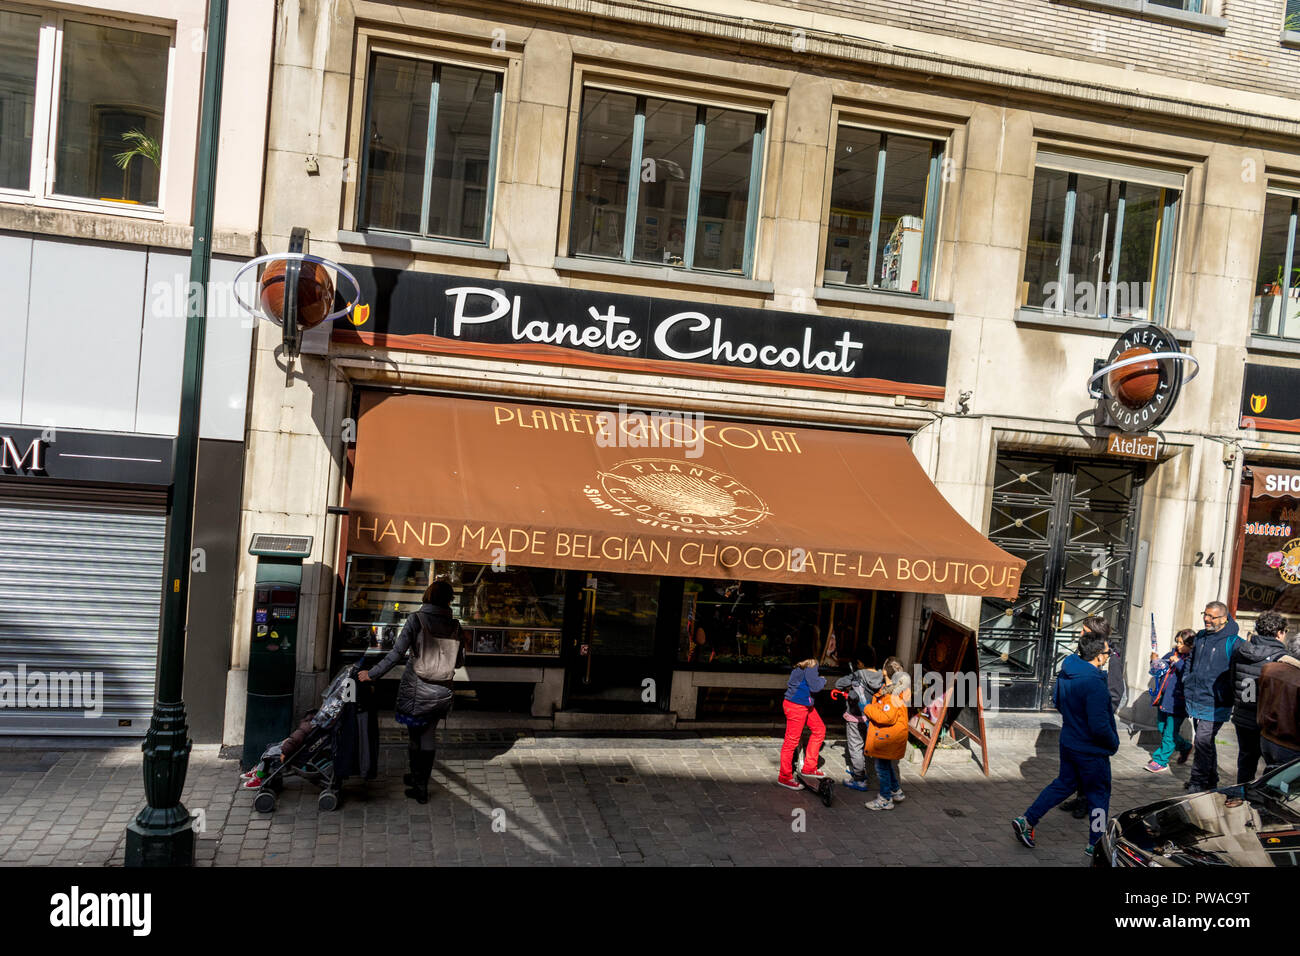 Brussels, Belgium - April 2017: The famous planet chocolate shop in the city of Brussels, Belgium Stock Photo